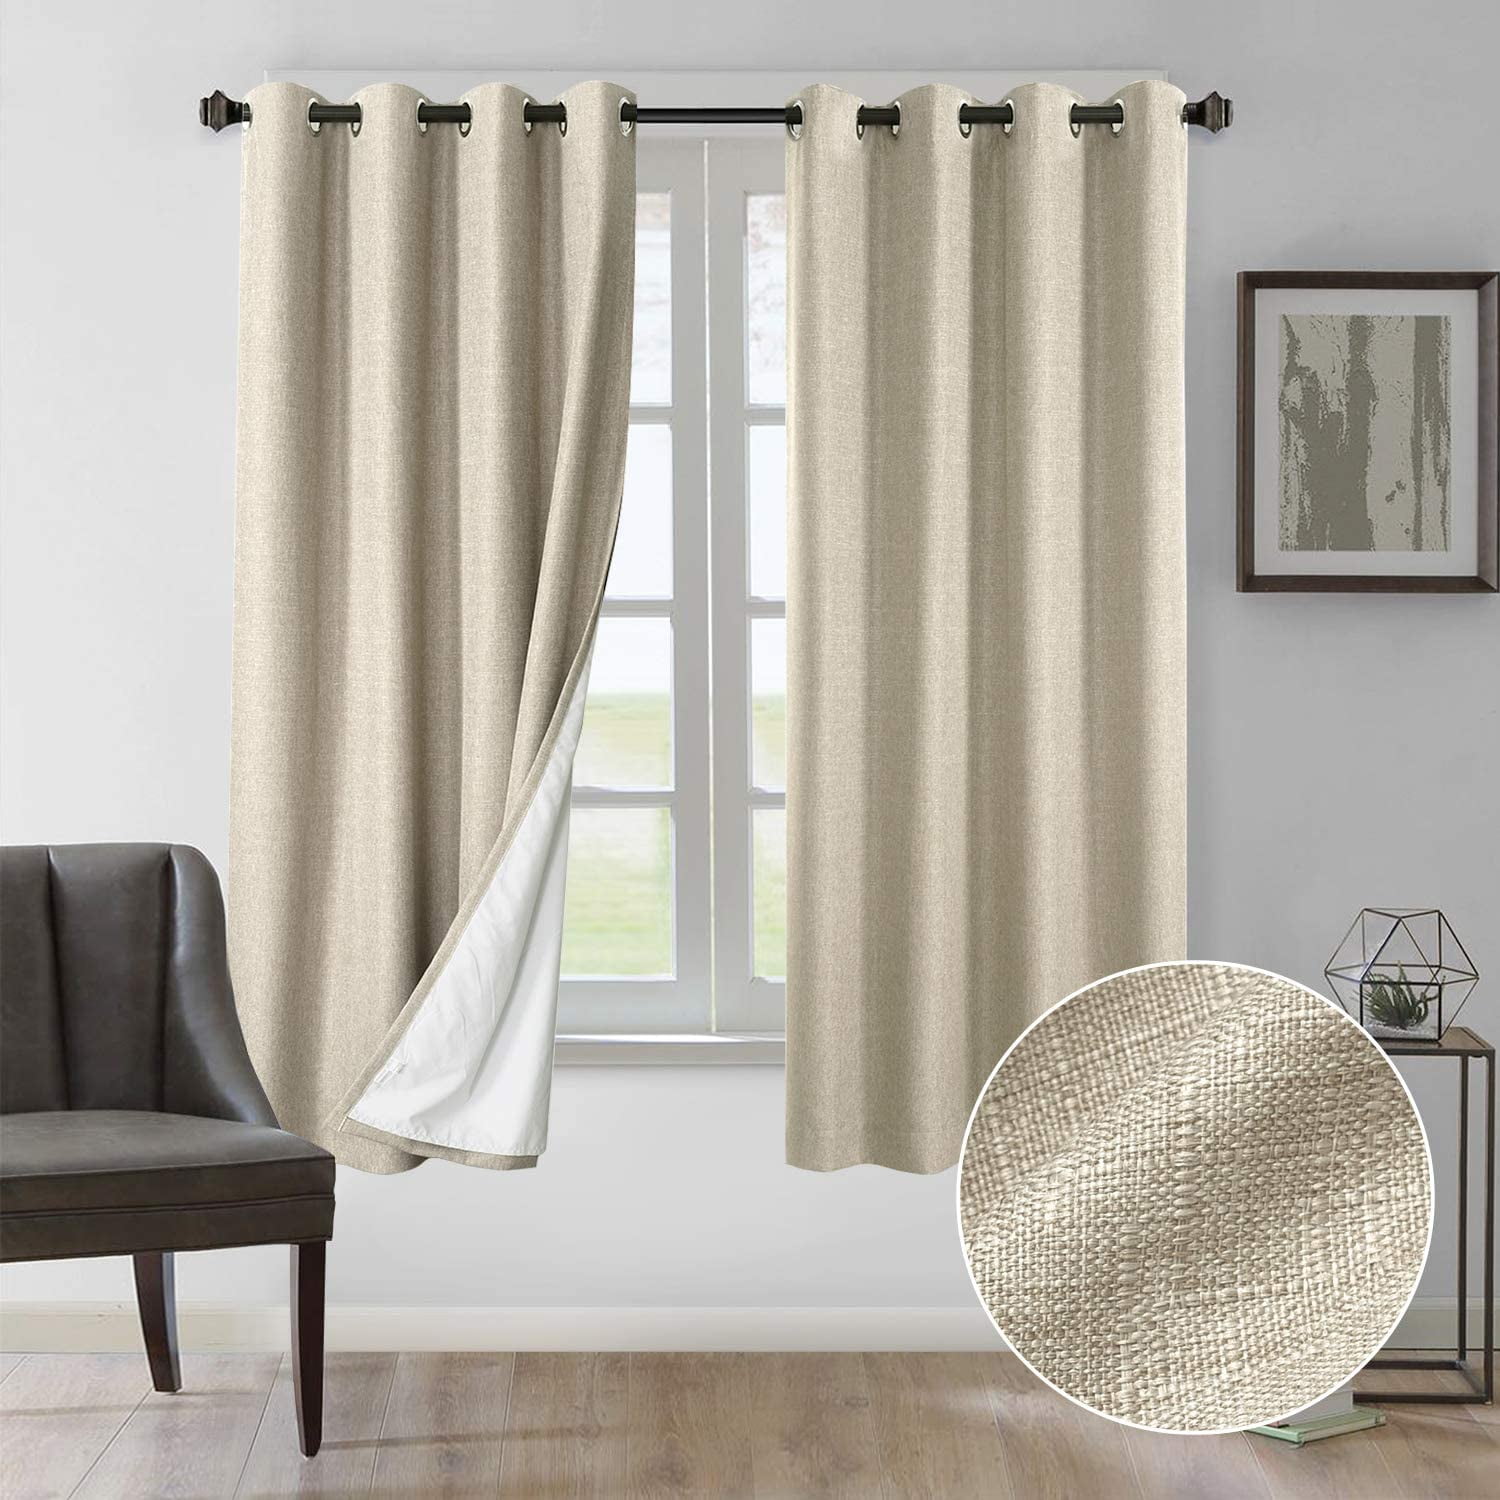 Rose Home Fashion Curtains 63 Inch Length, 100% Blackout Curtains(with